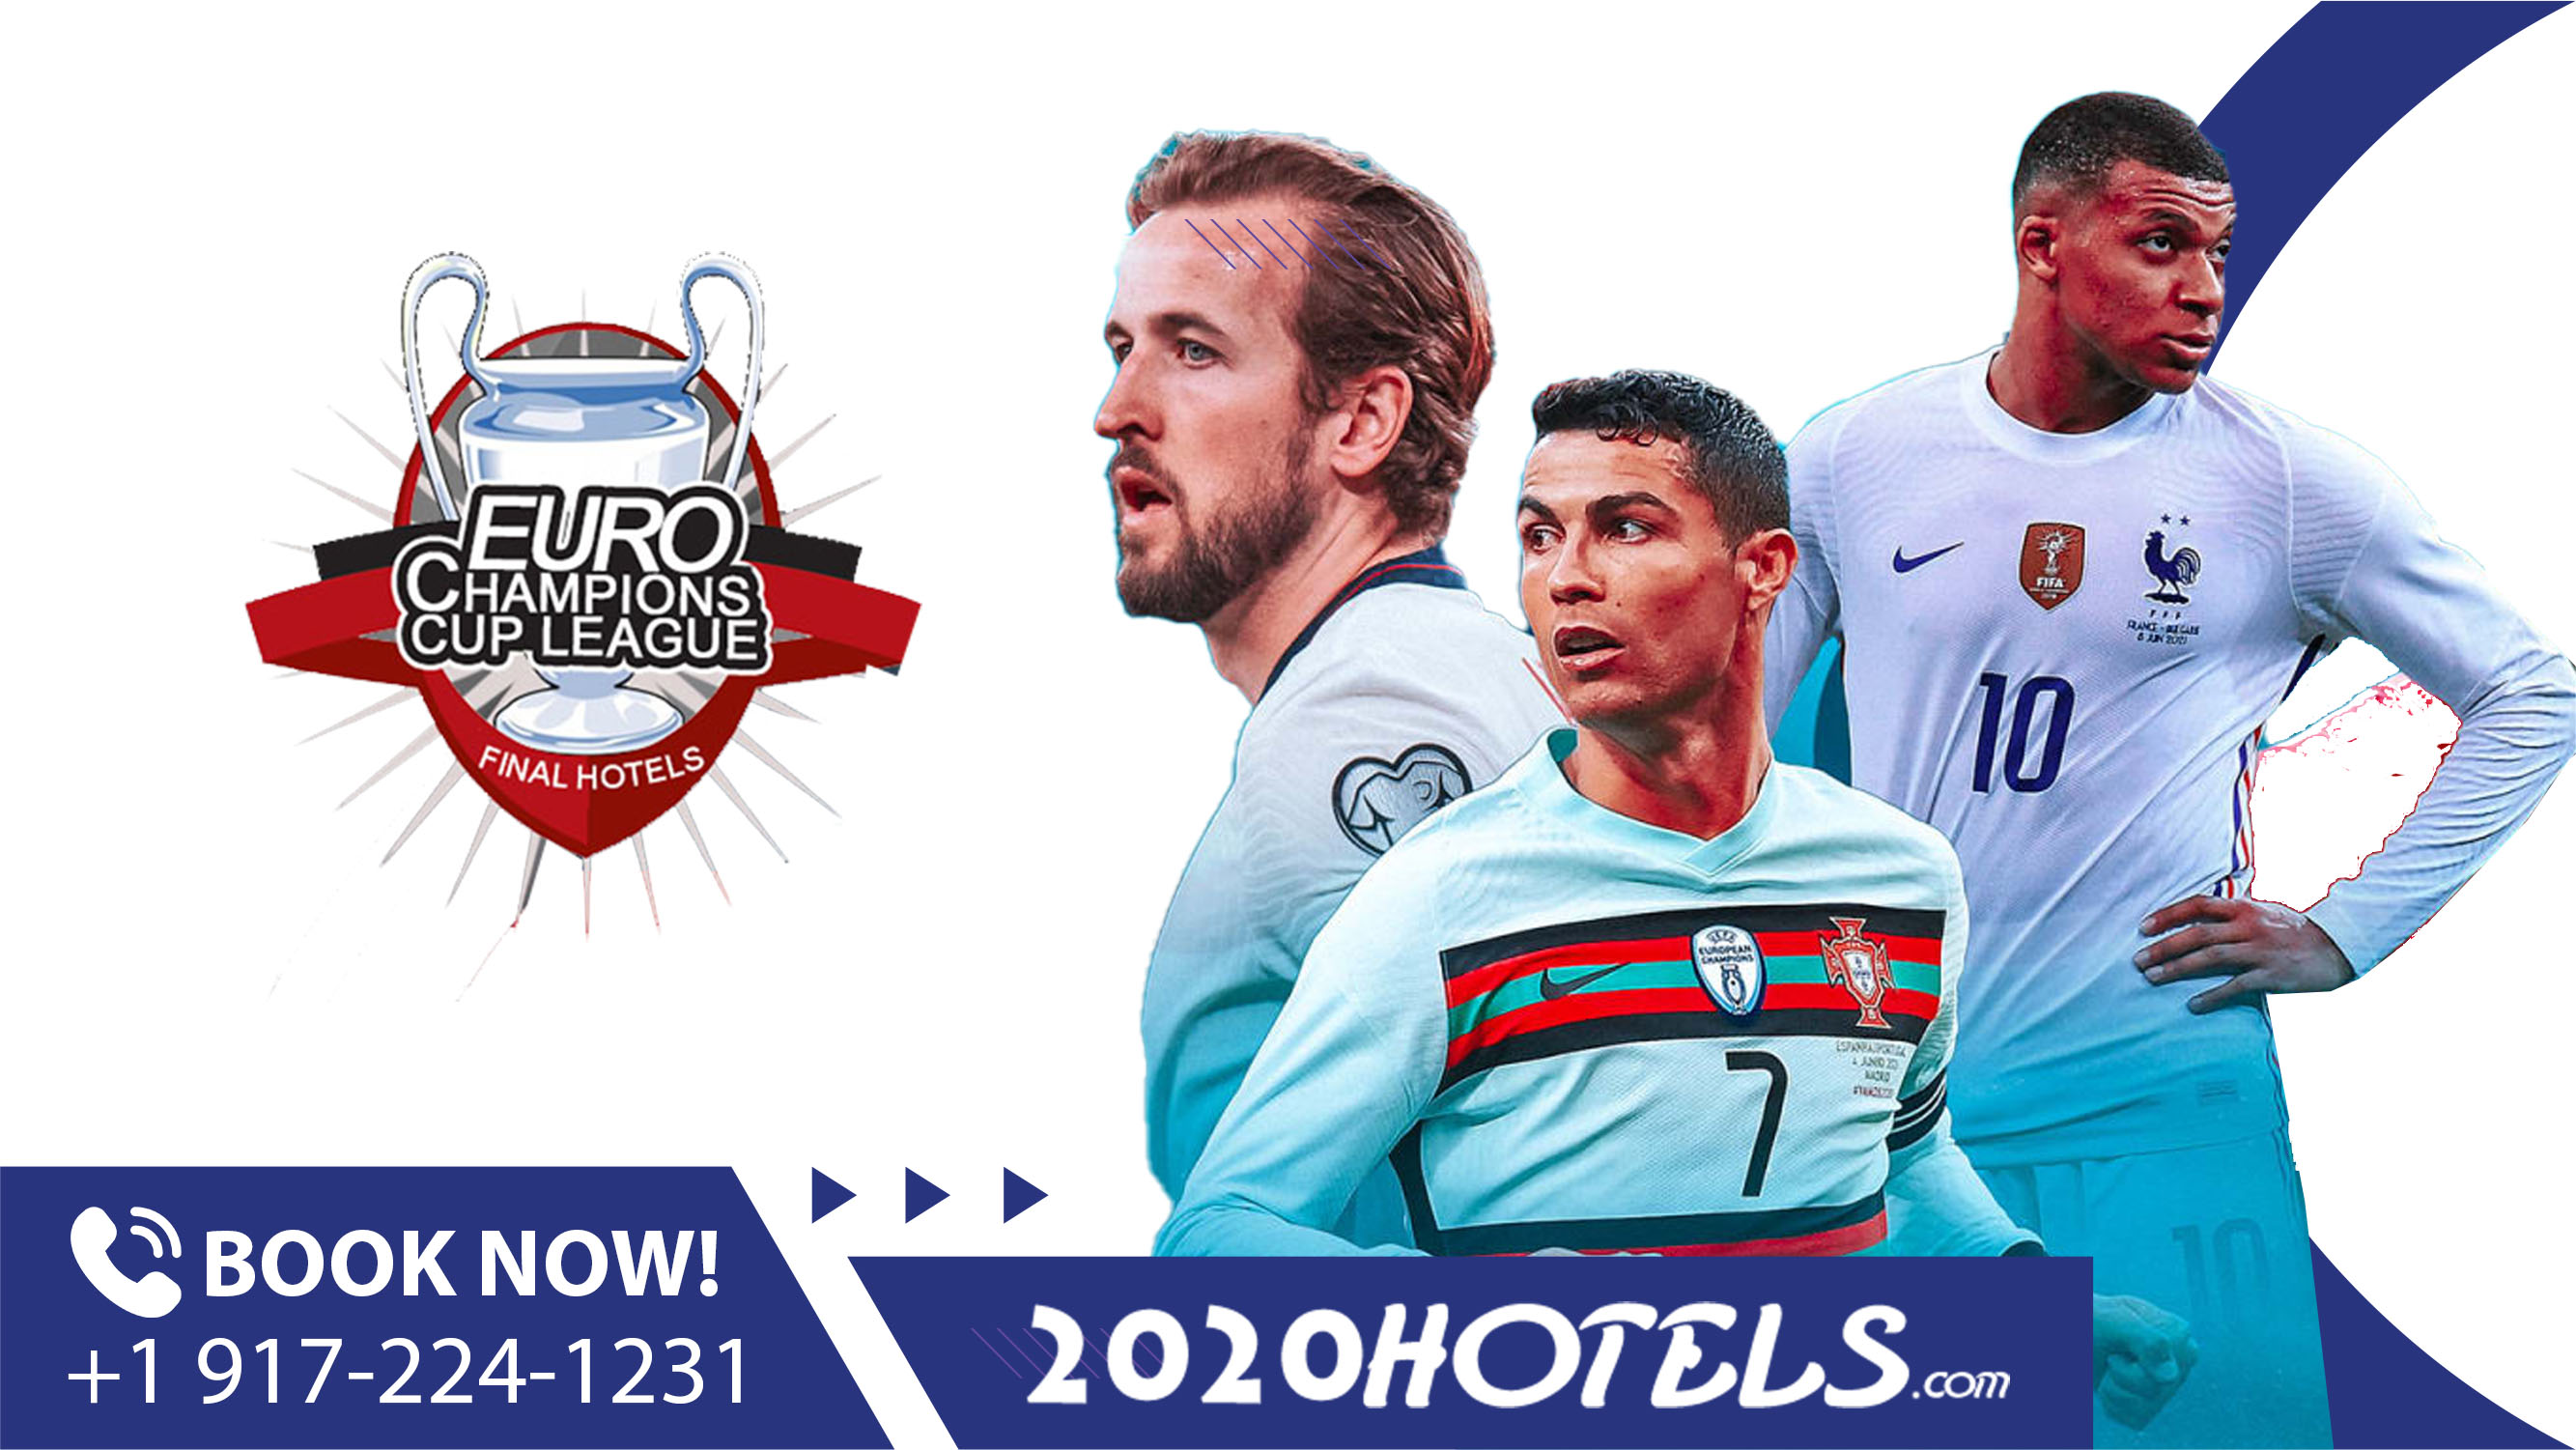 Book now UEFA Euro 2020 Hotels, last minute deals on hotels and packages only @ 2020hotels.com click here to book!